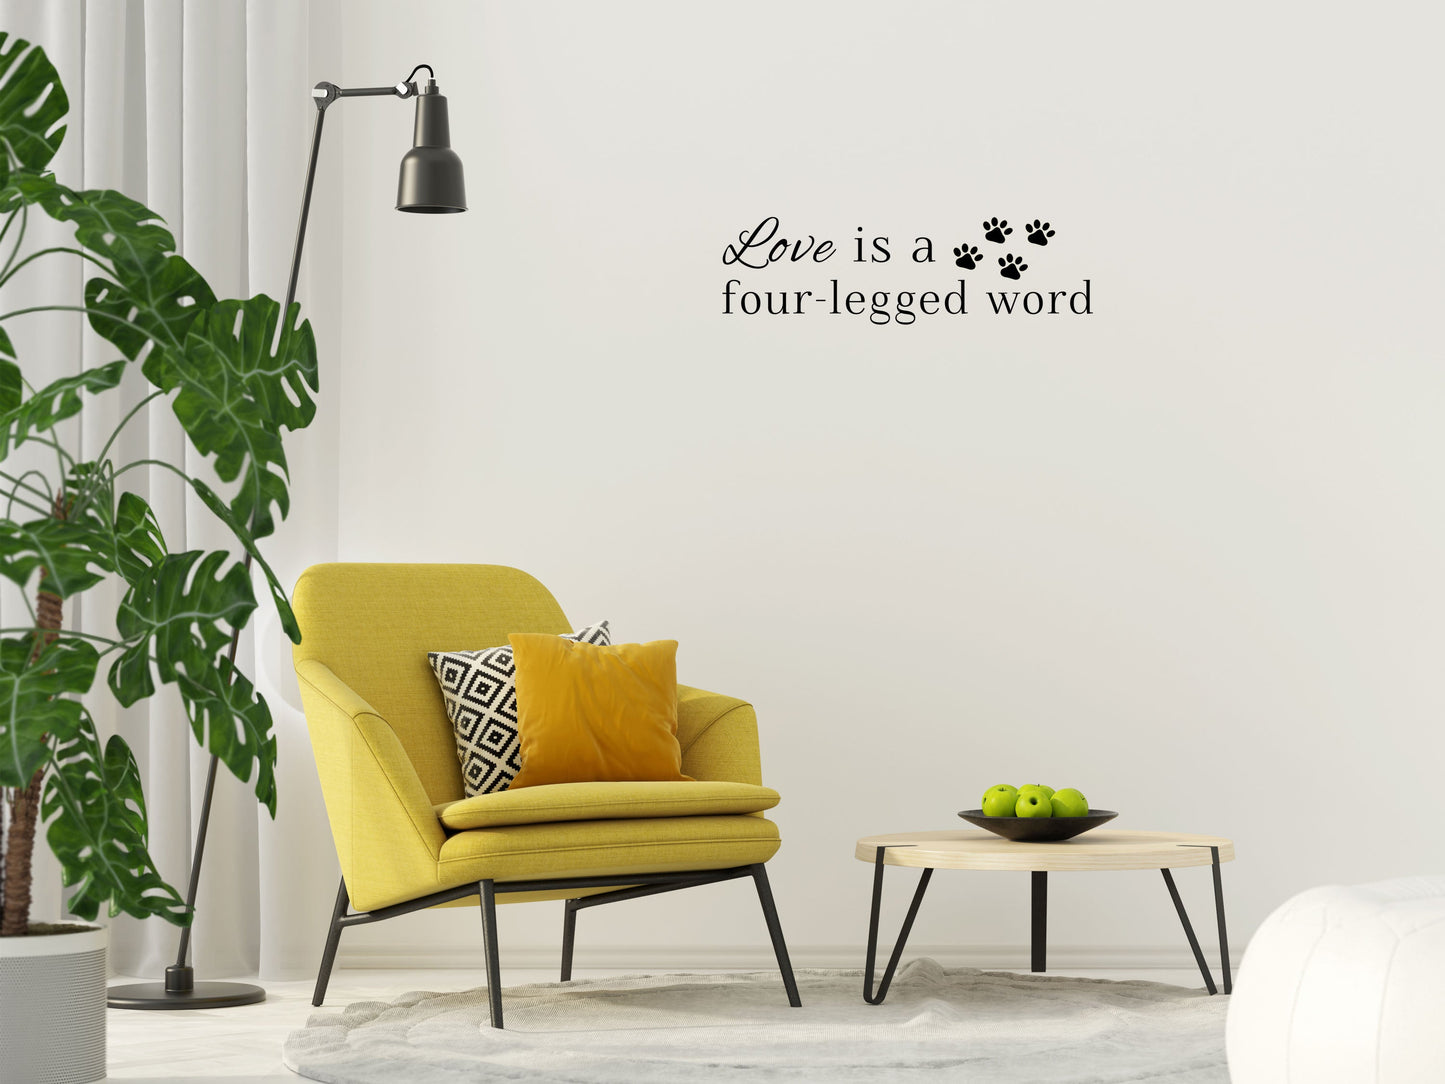 Love Is A Four-Legged Word Vinyl Wall Decal Inspirational Wall Signs 